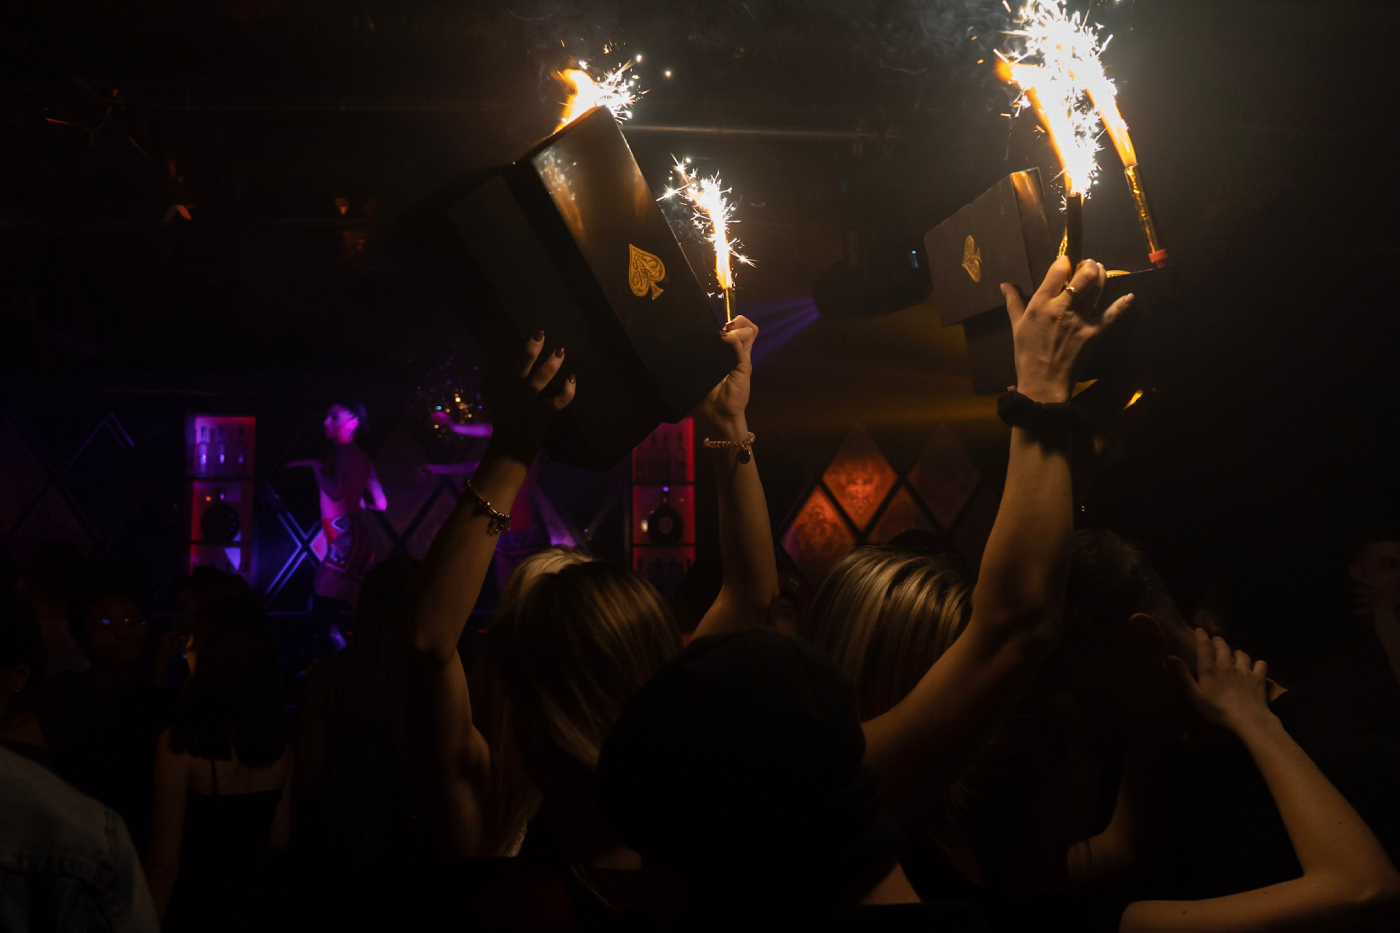 Party in a nightclub with boxes and lightsparks